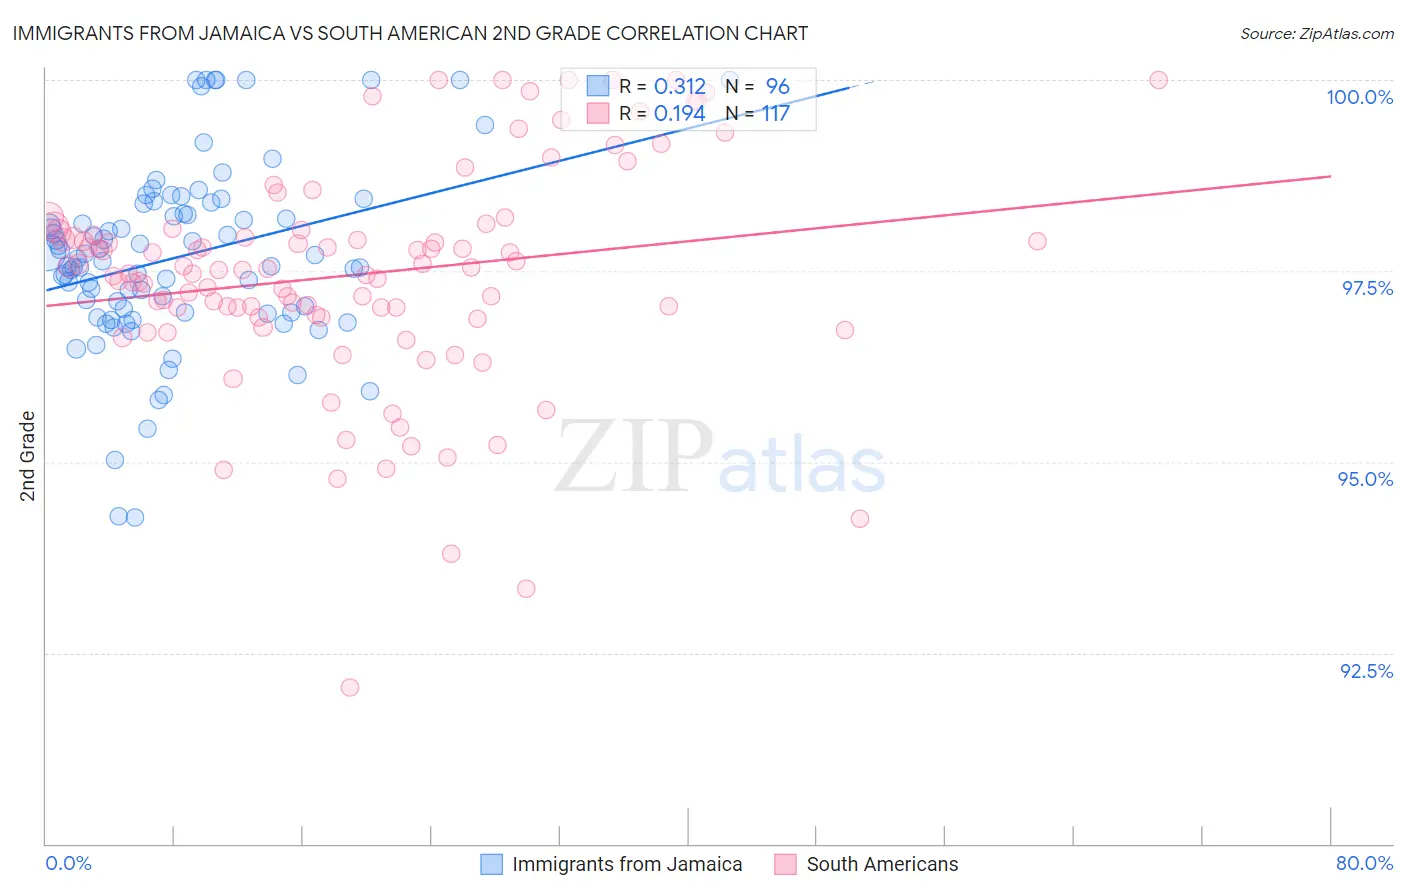 Immigrants from Jamaica vs South American 2nd Grade